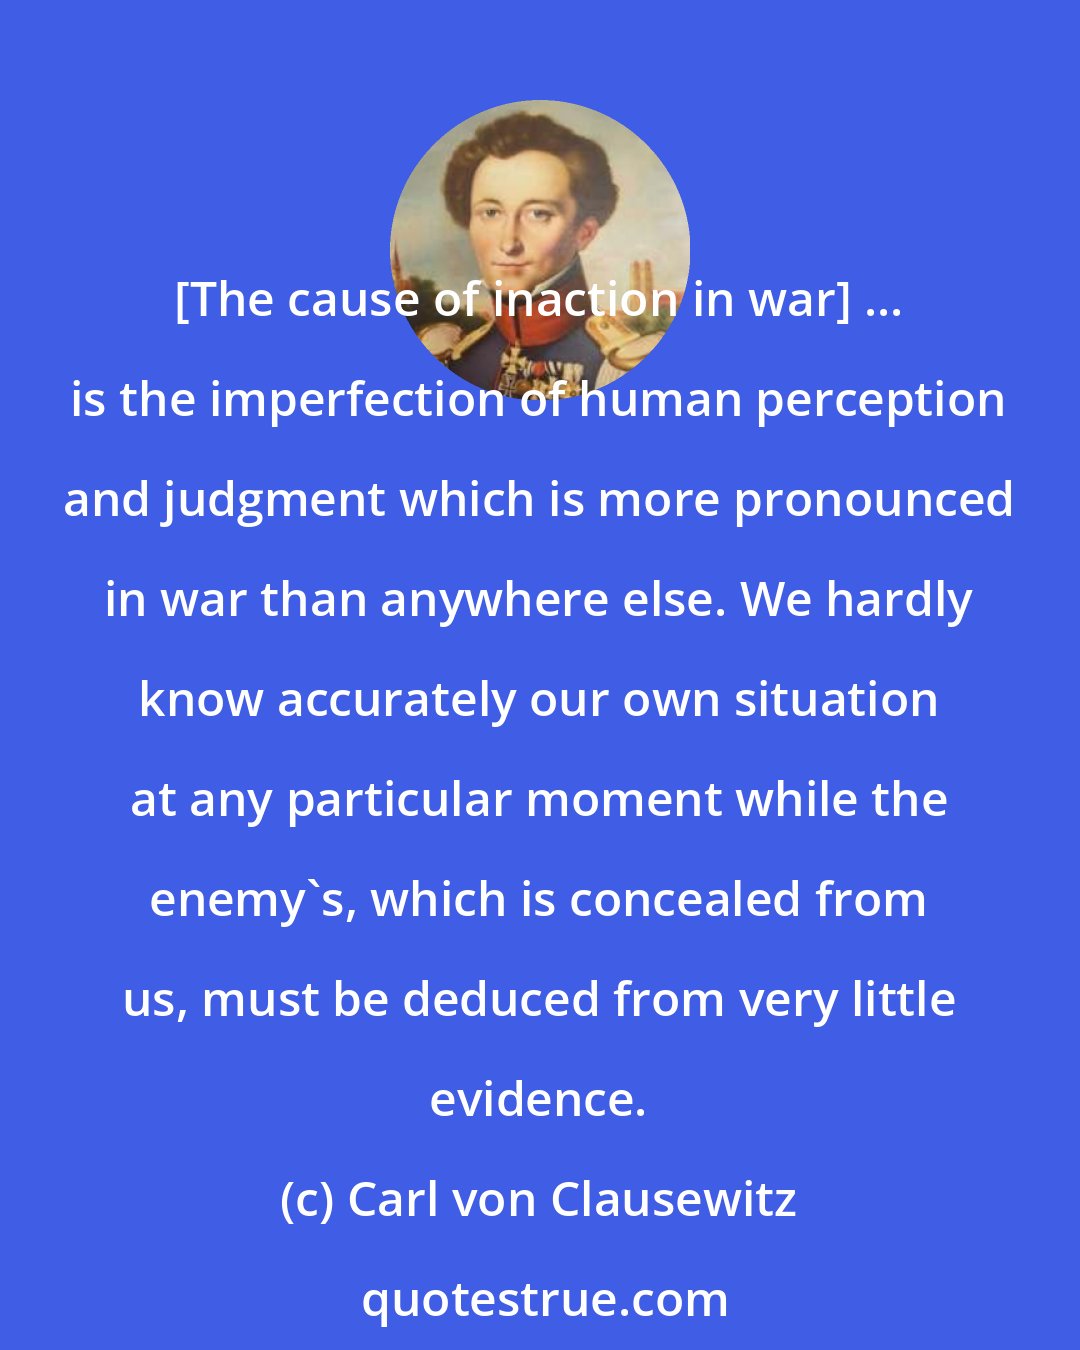 Carl von Clausewitz: [The cause of inaction in war] ... is the imperfection of human perception and judgment which is more pronounced in war than anywhere else. We hardly know accurately our own situation at any particular moment while the enemy's, which is concealed from us, must be deduced from very little evidence.